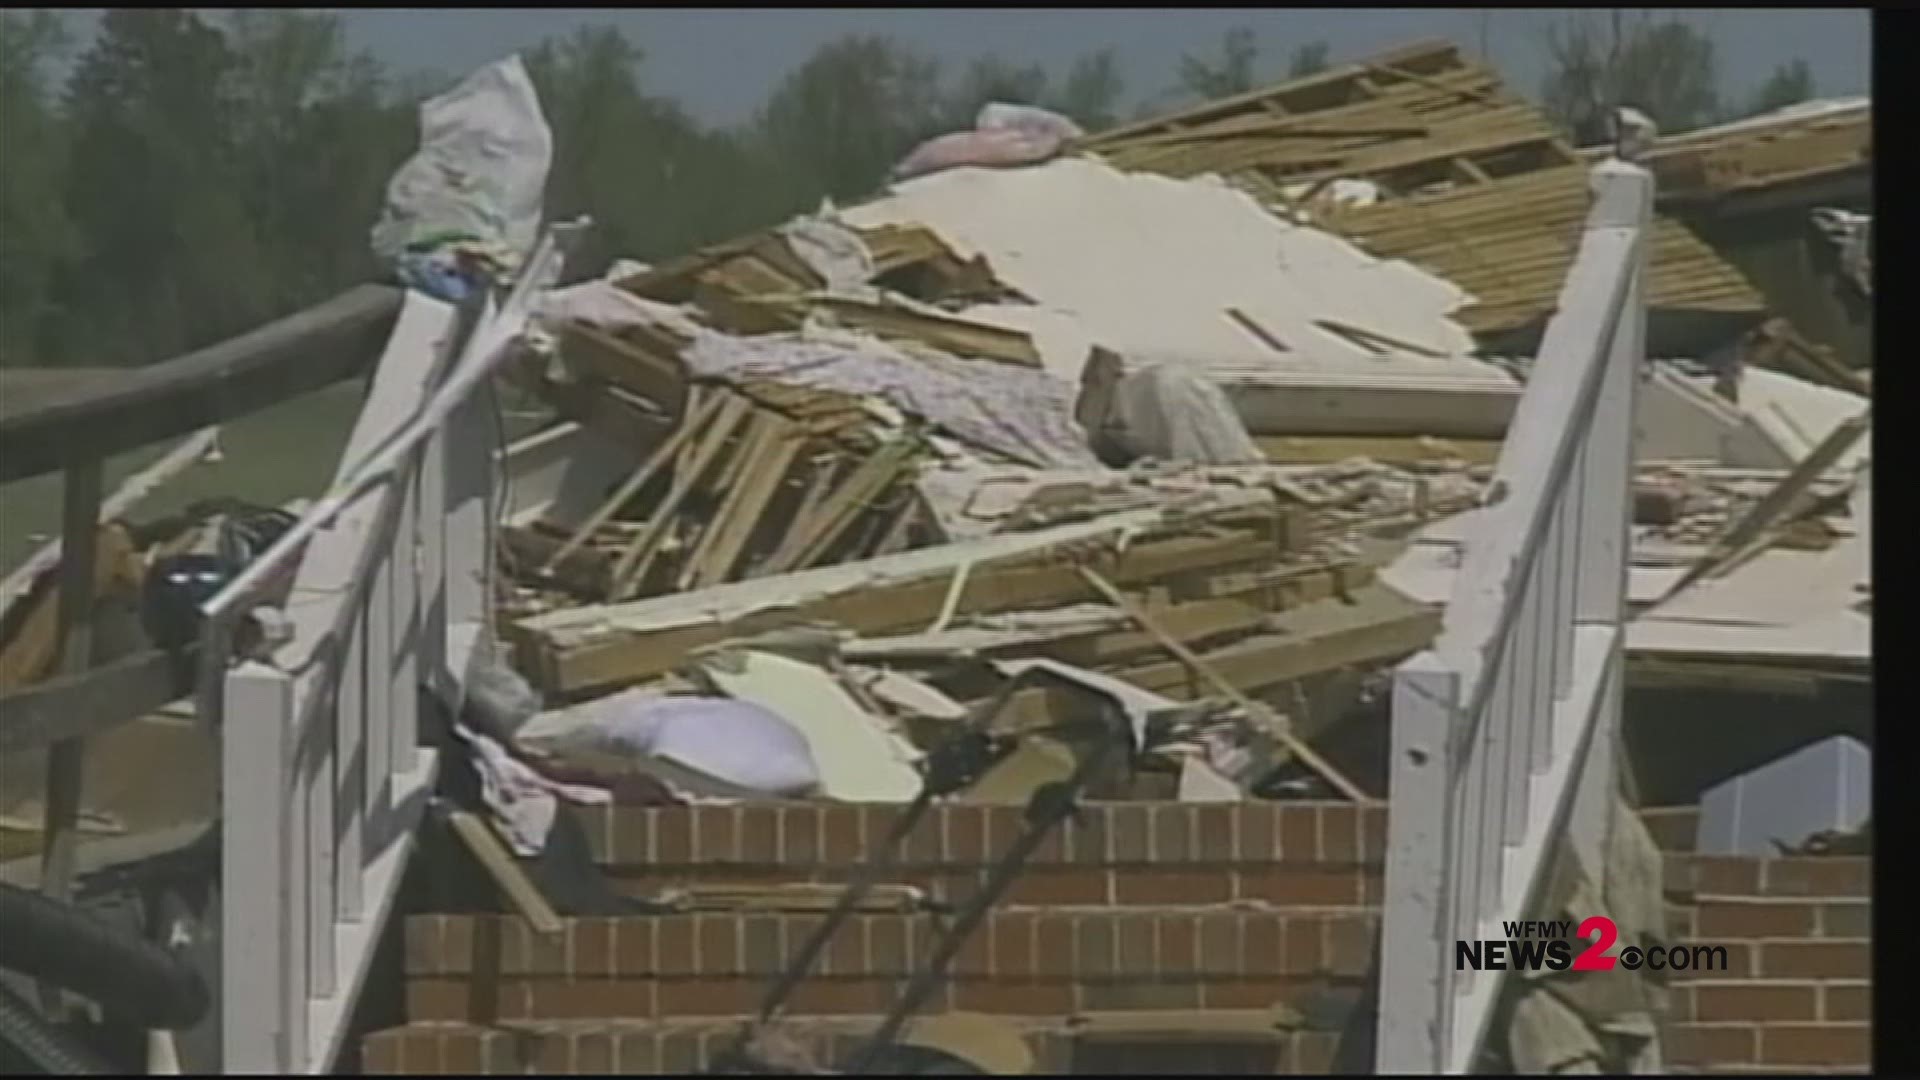 The Sanford tornadoes was part of an outbreak of multiple twisters that took NC by storm